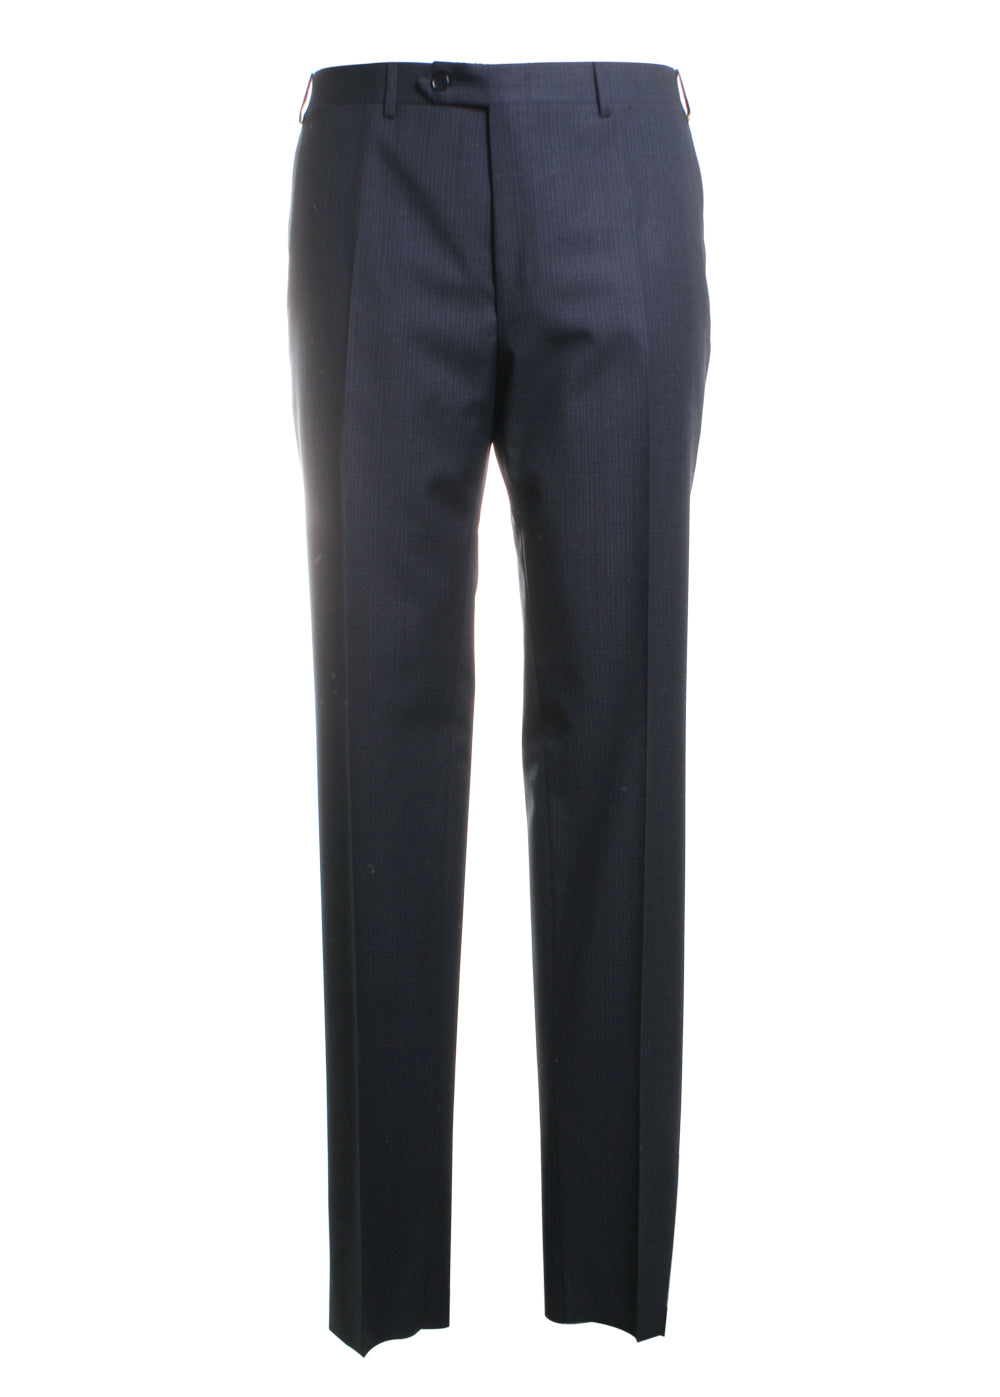 Canali Dress Pant 1166 in Charcoal 